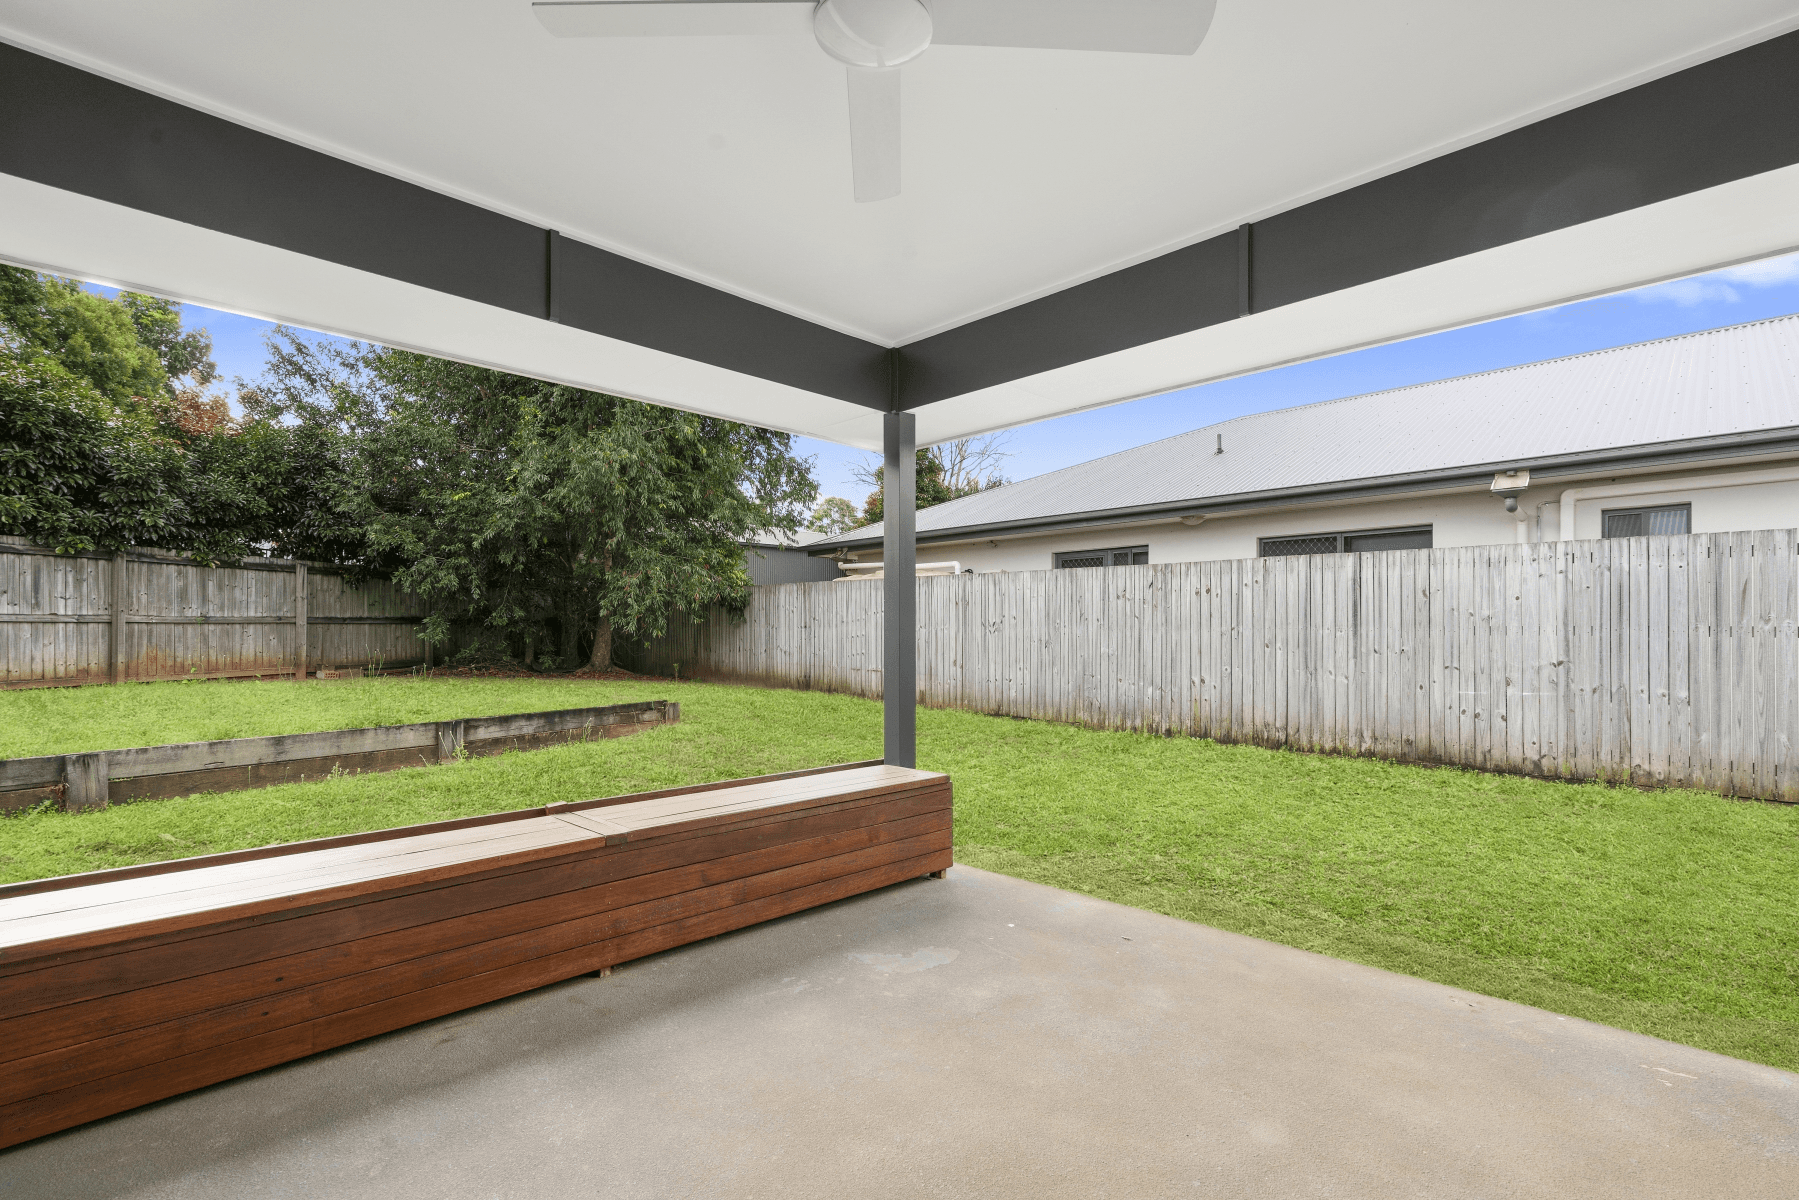 7 Trilogy Street, GLASS HOUSE MOUNTAINS, QLD 4518